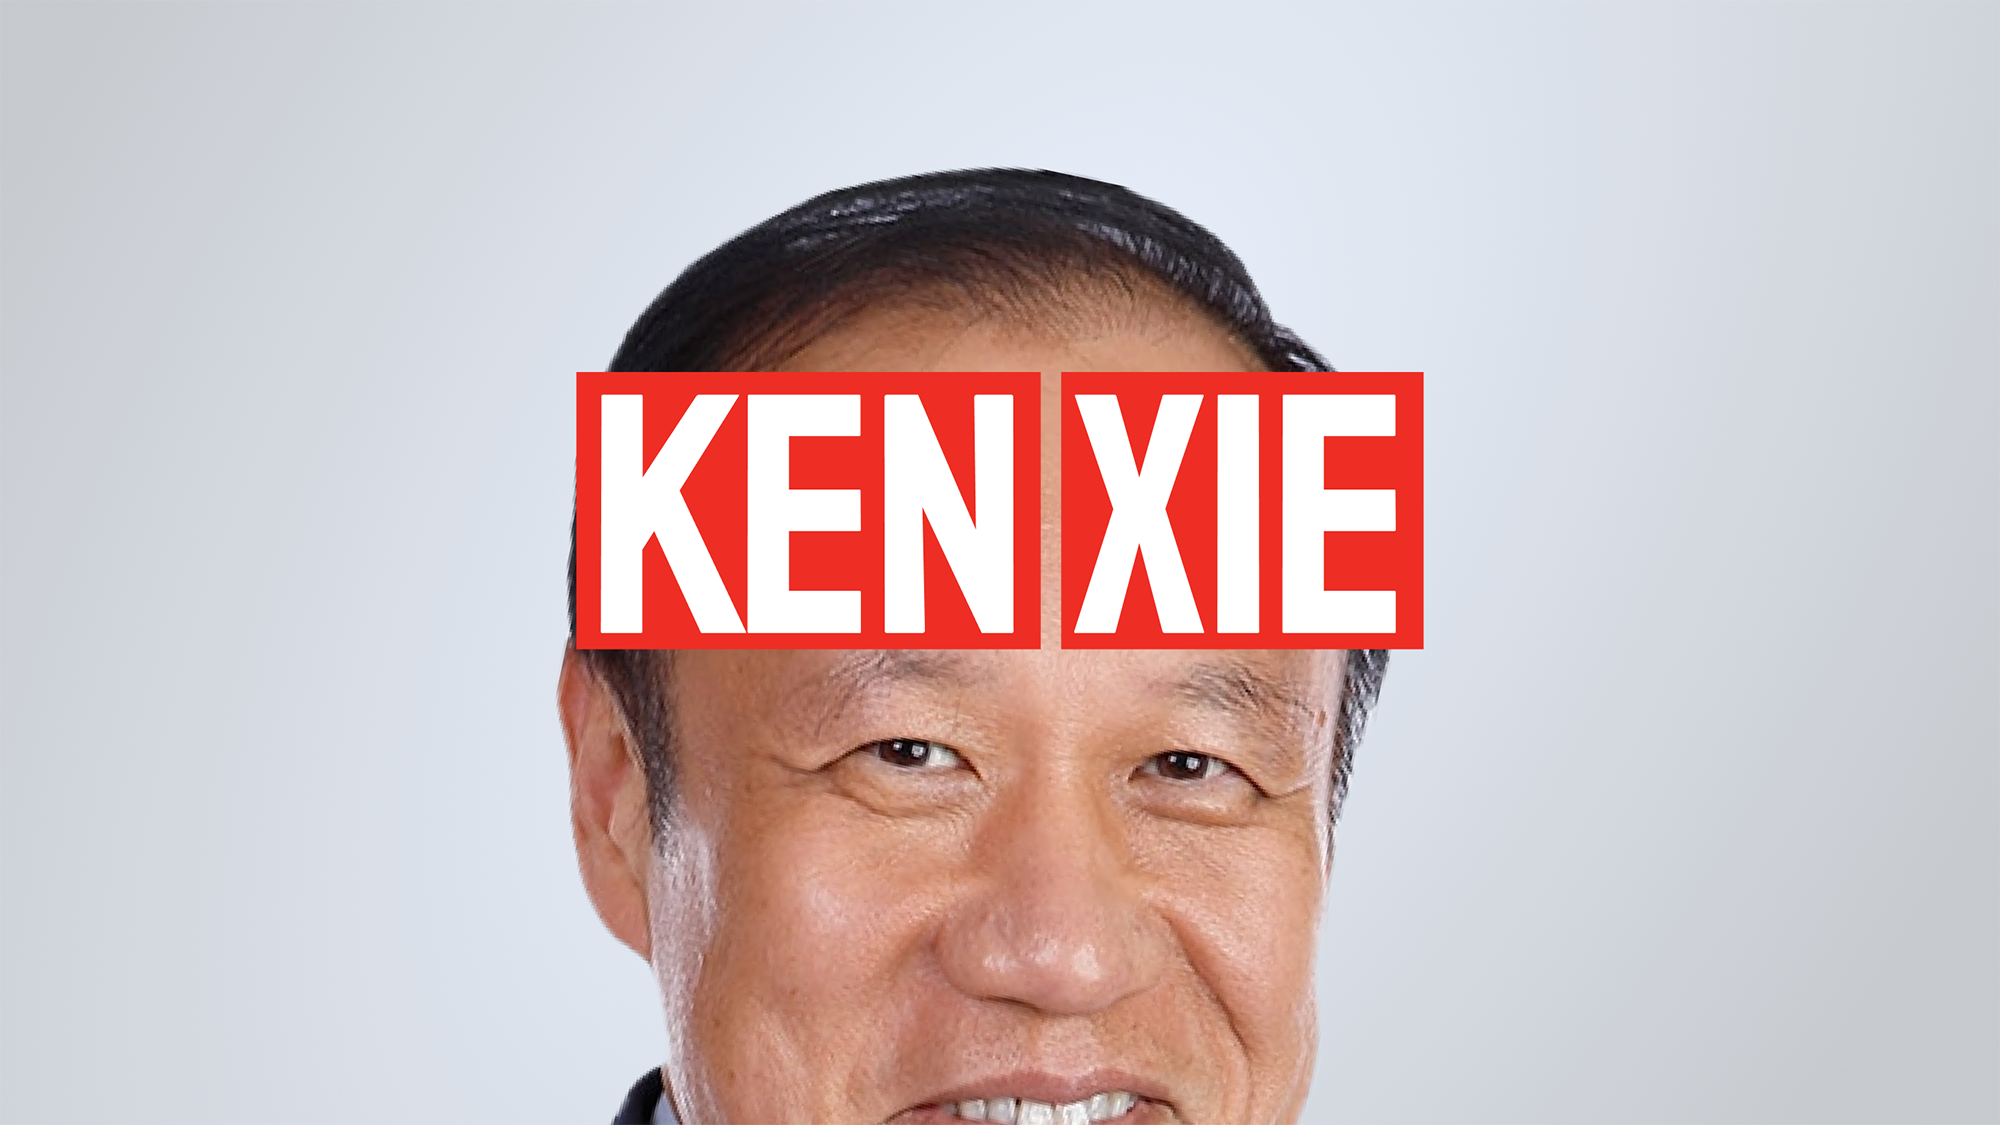 Ken Xie: Founder & CEO of Fortinet